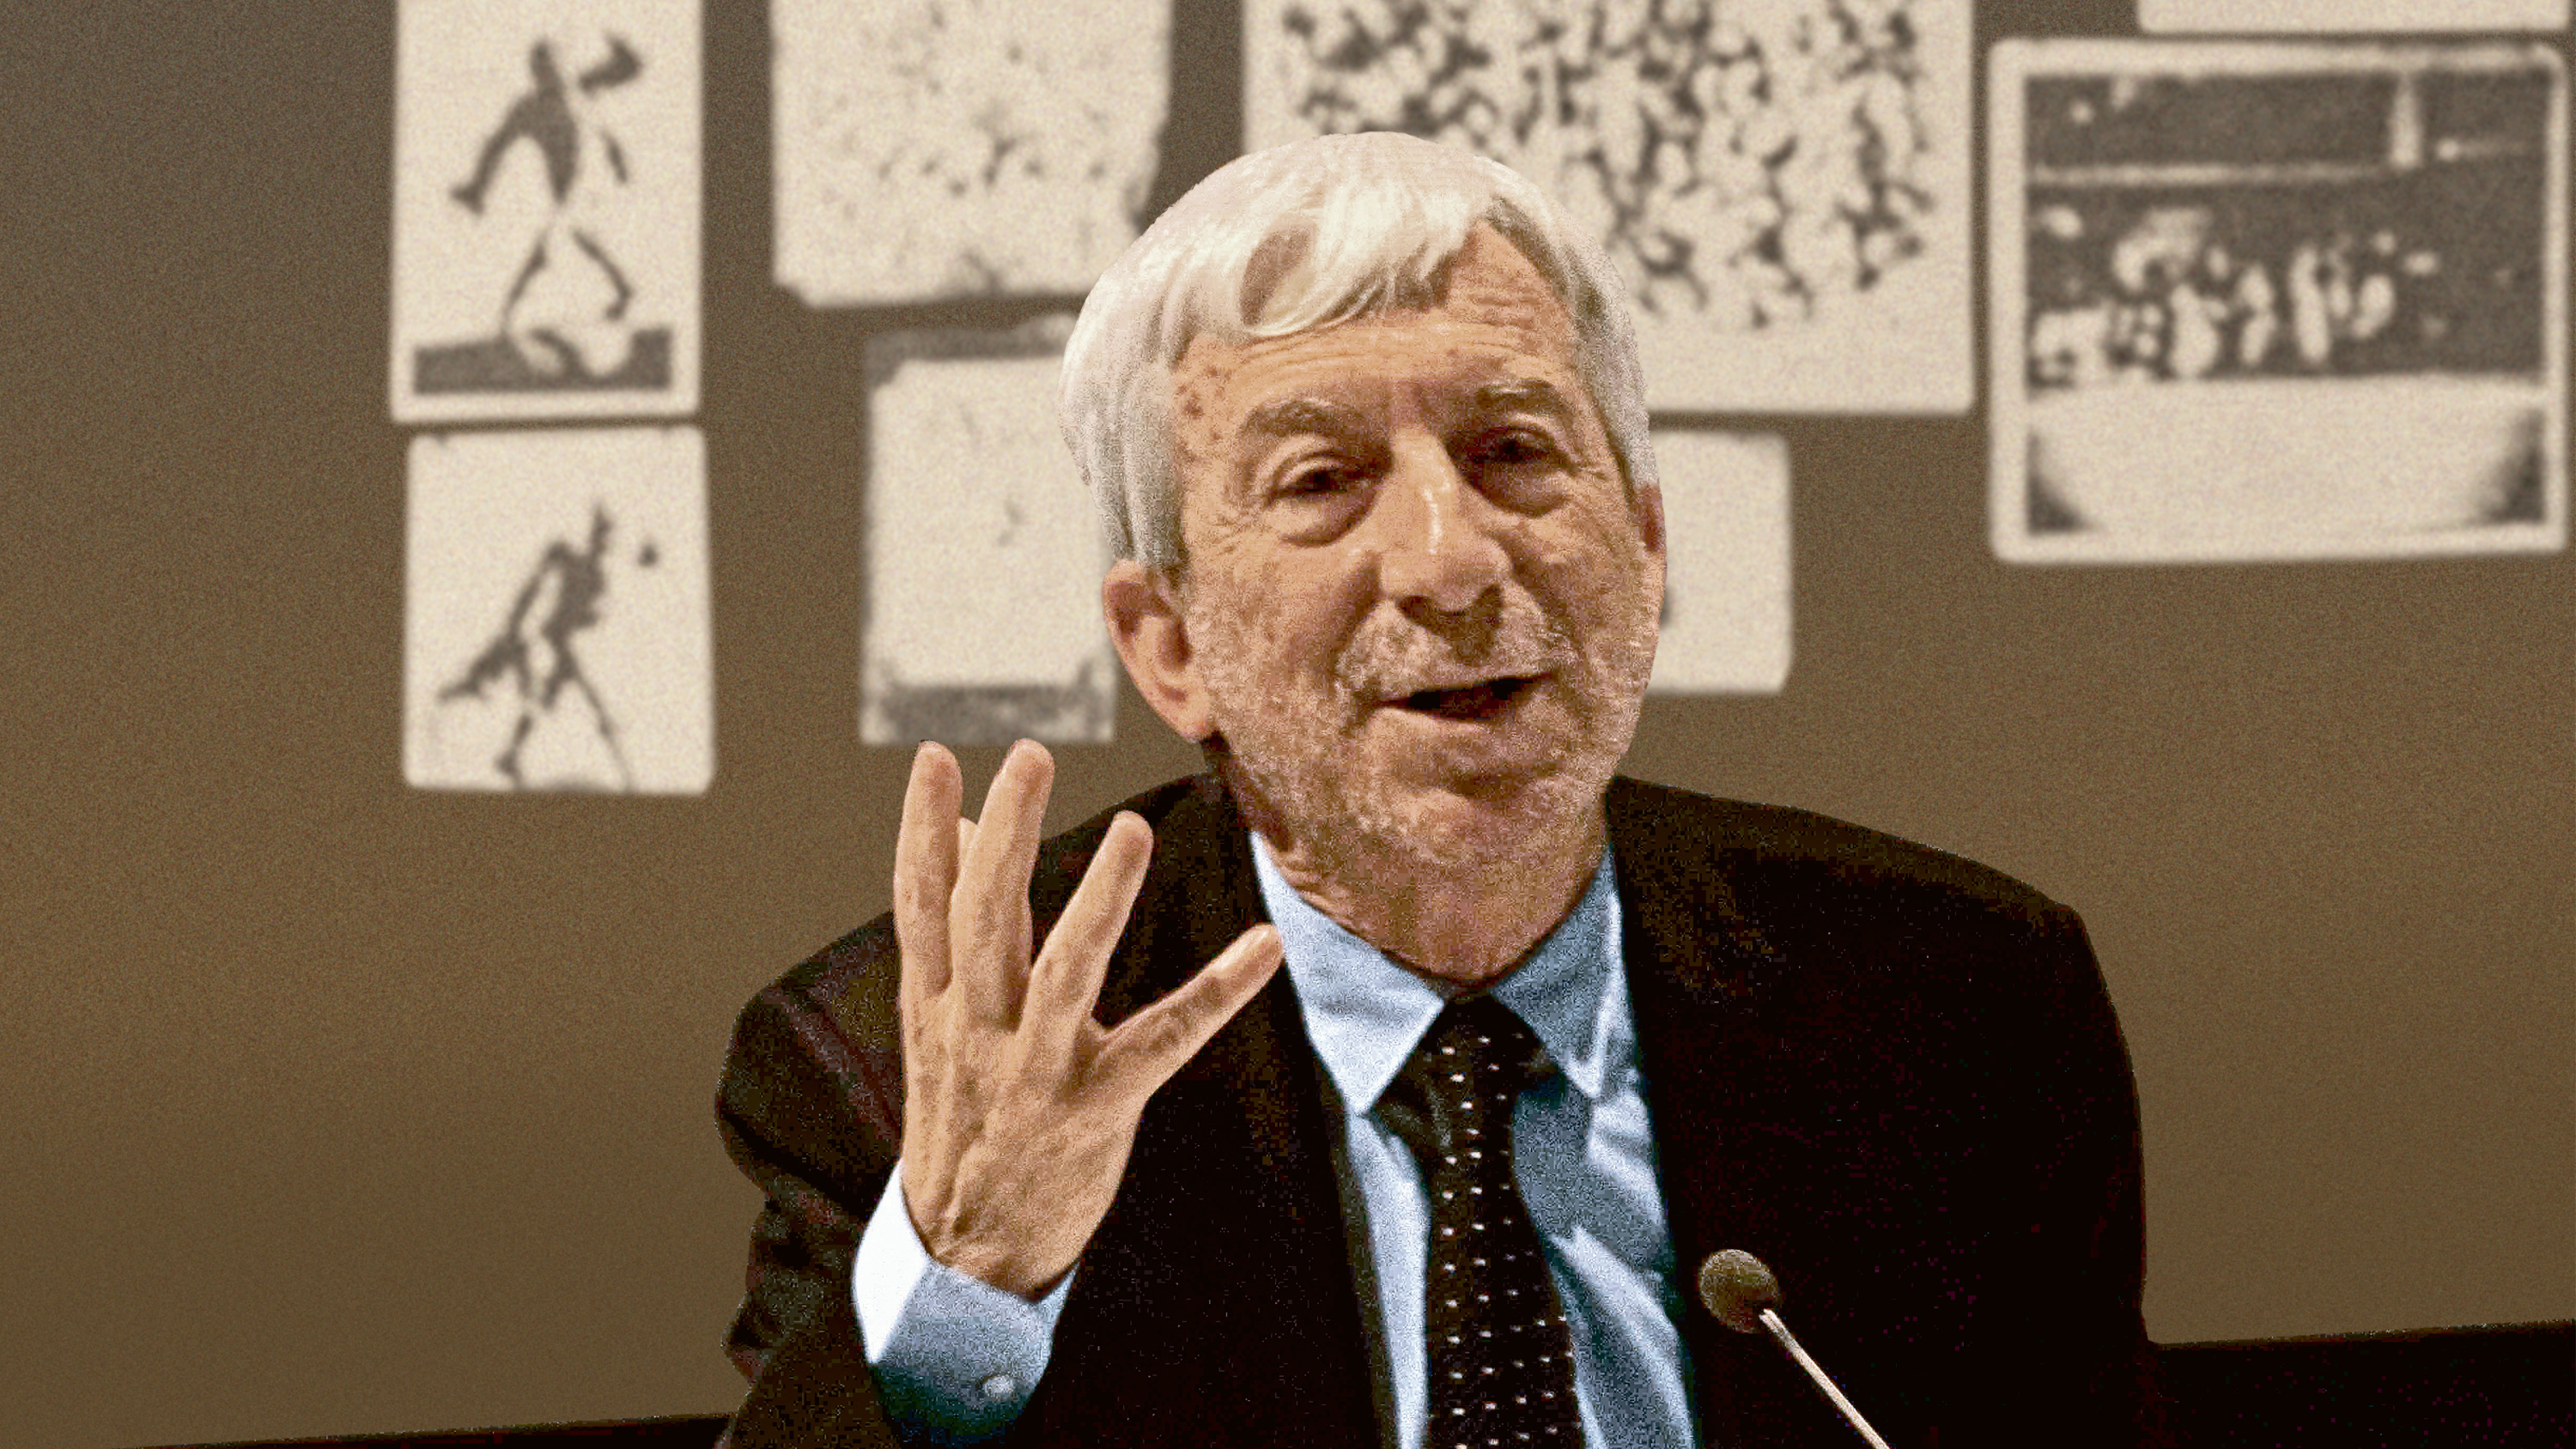 Luis Fernández-Galiano, Award for Values of Spanish Architecture 